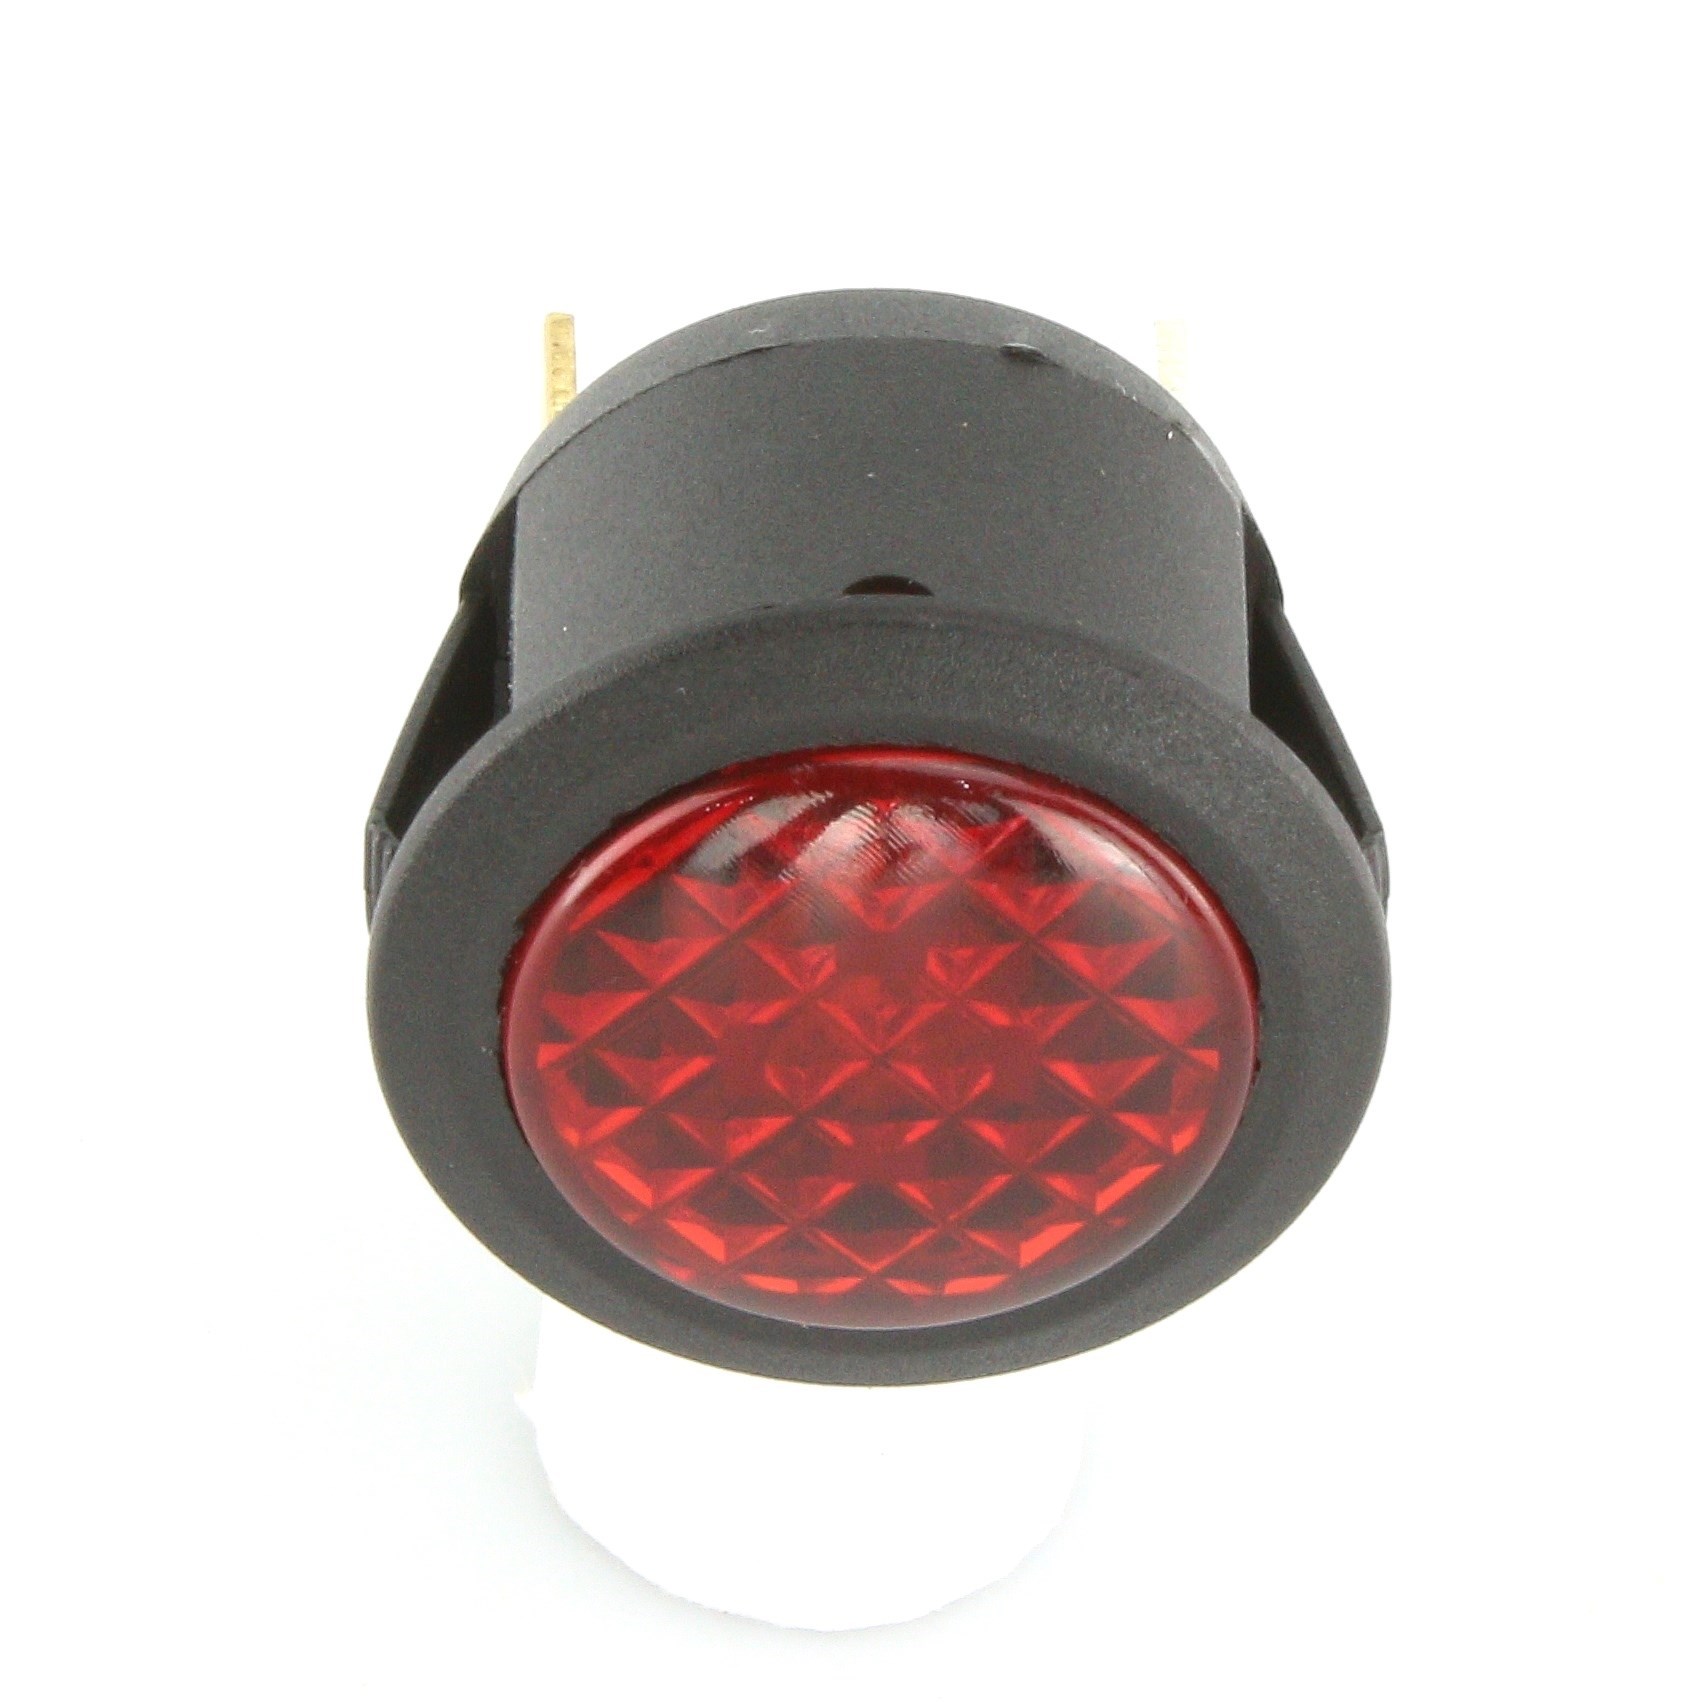 23mm Durchmesser ROTE LED-Warnleuchte